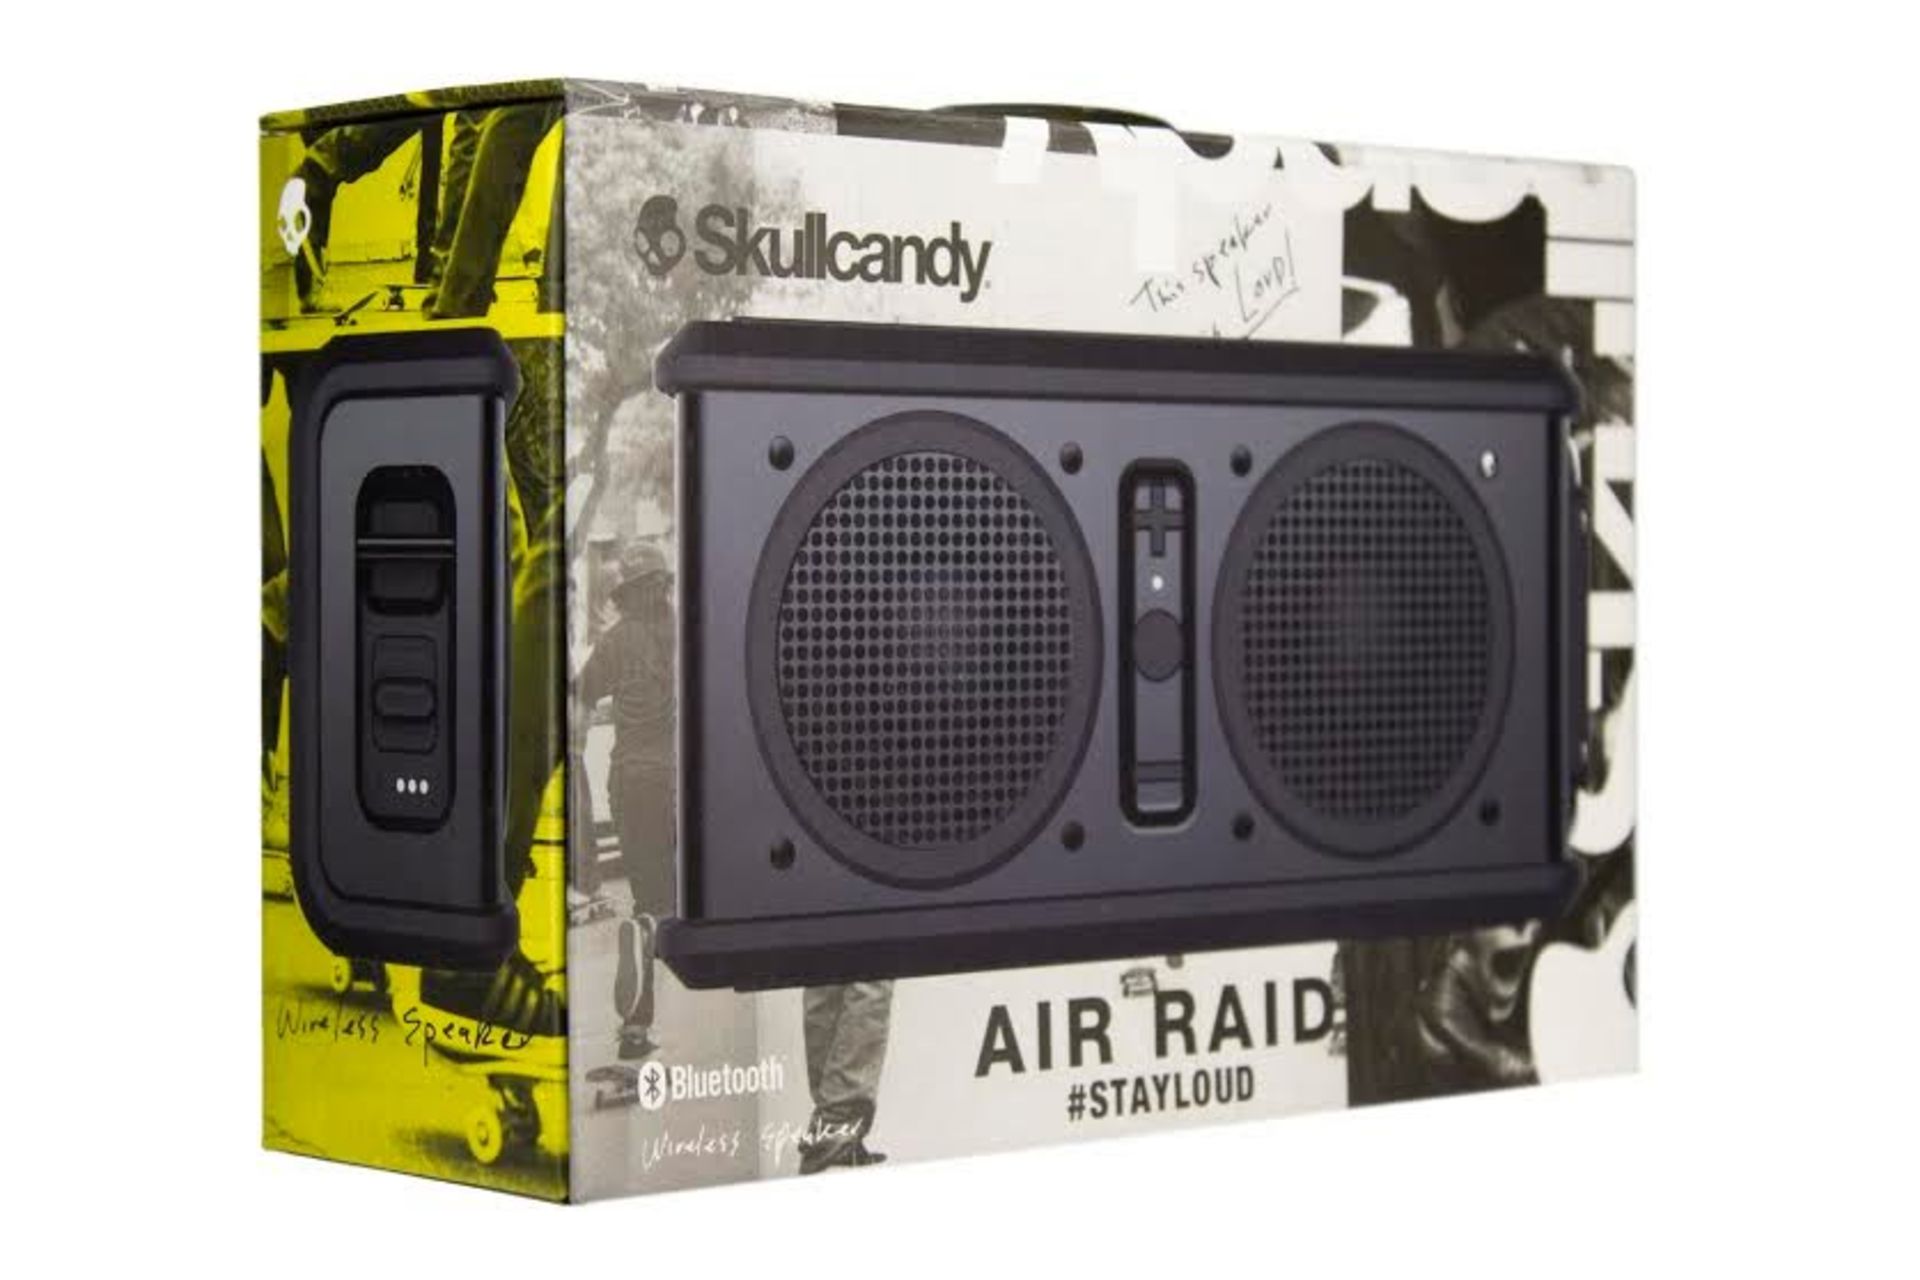 V *TRADE QTY* Brand New Skull Candy Air Raid #Stayloud Bluetooth Wireless Water Resistant Speakers - - Image 2 of 2